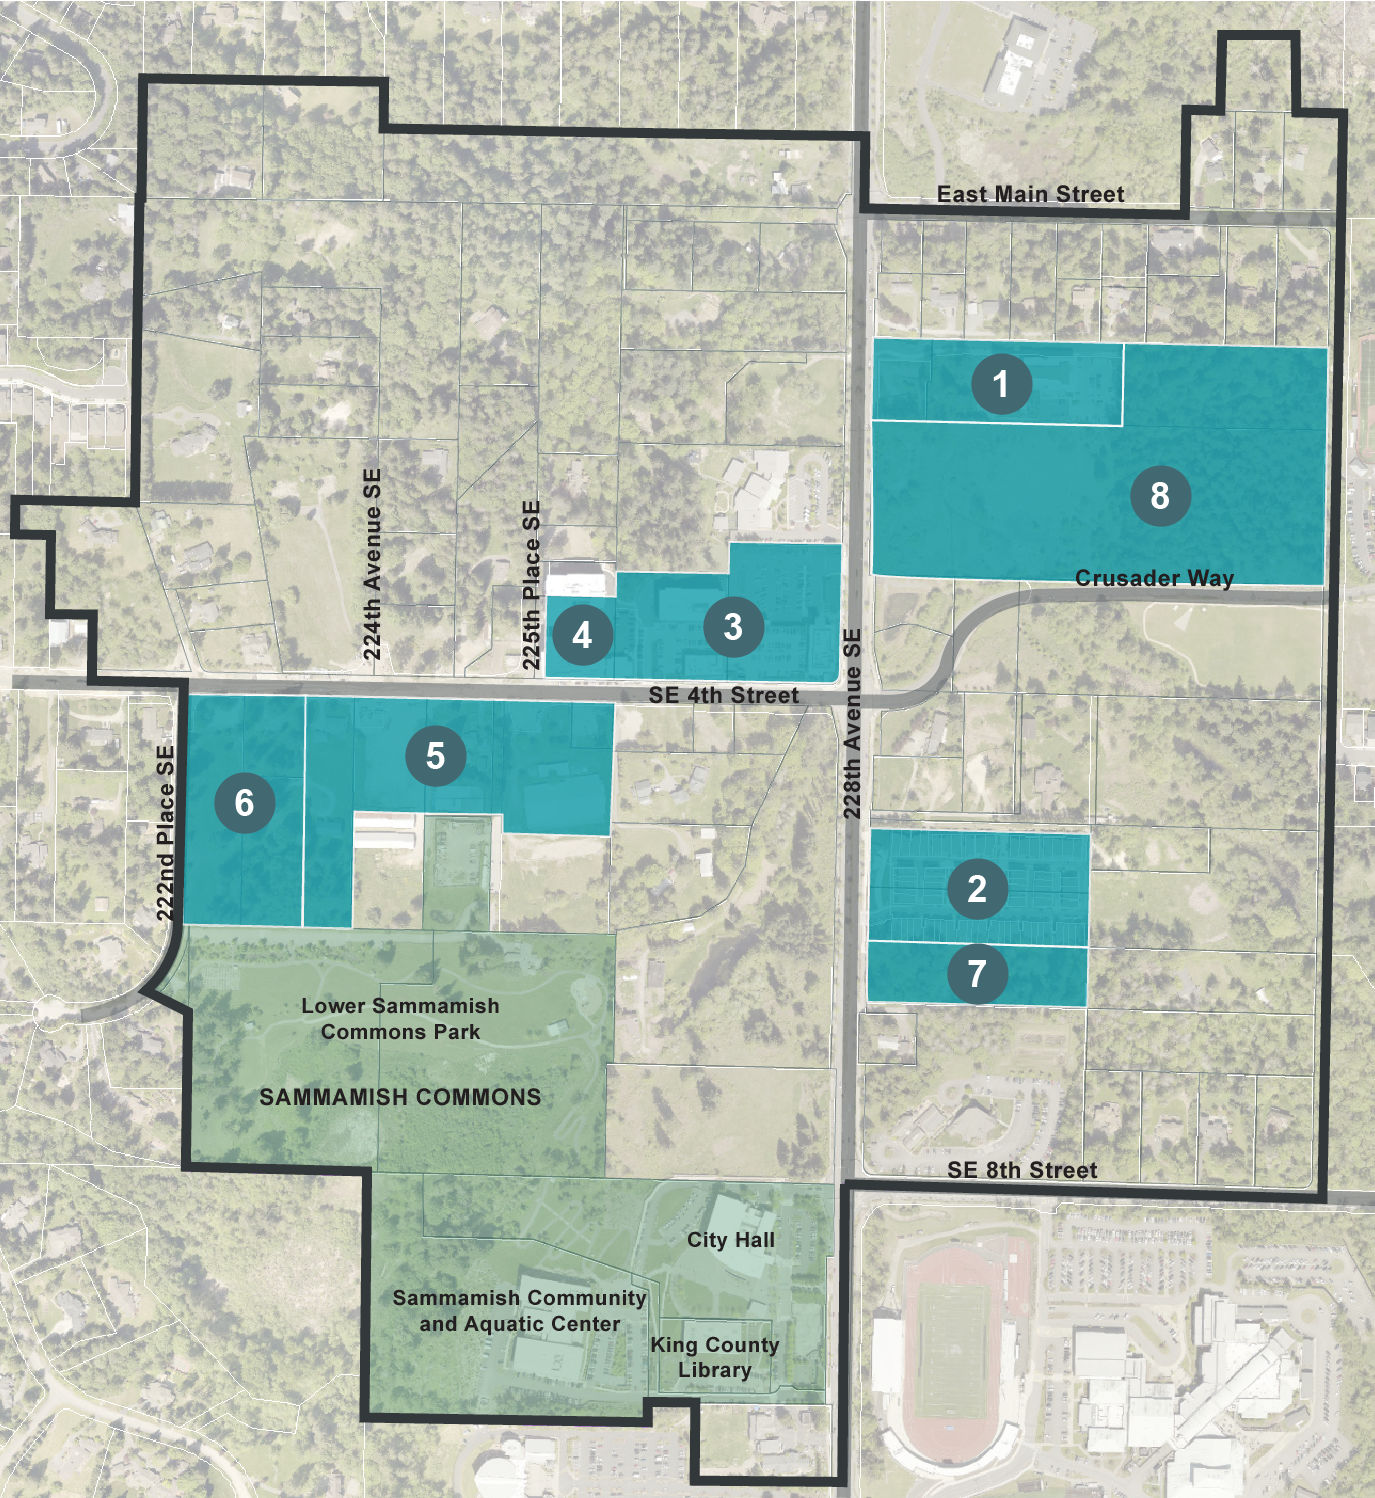 Map of Town Center development projects and project area, marking 7 planned or underway projects as well as locations of existing public amenities